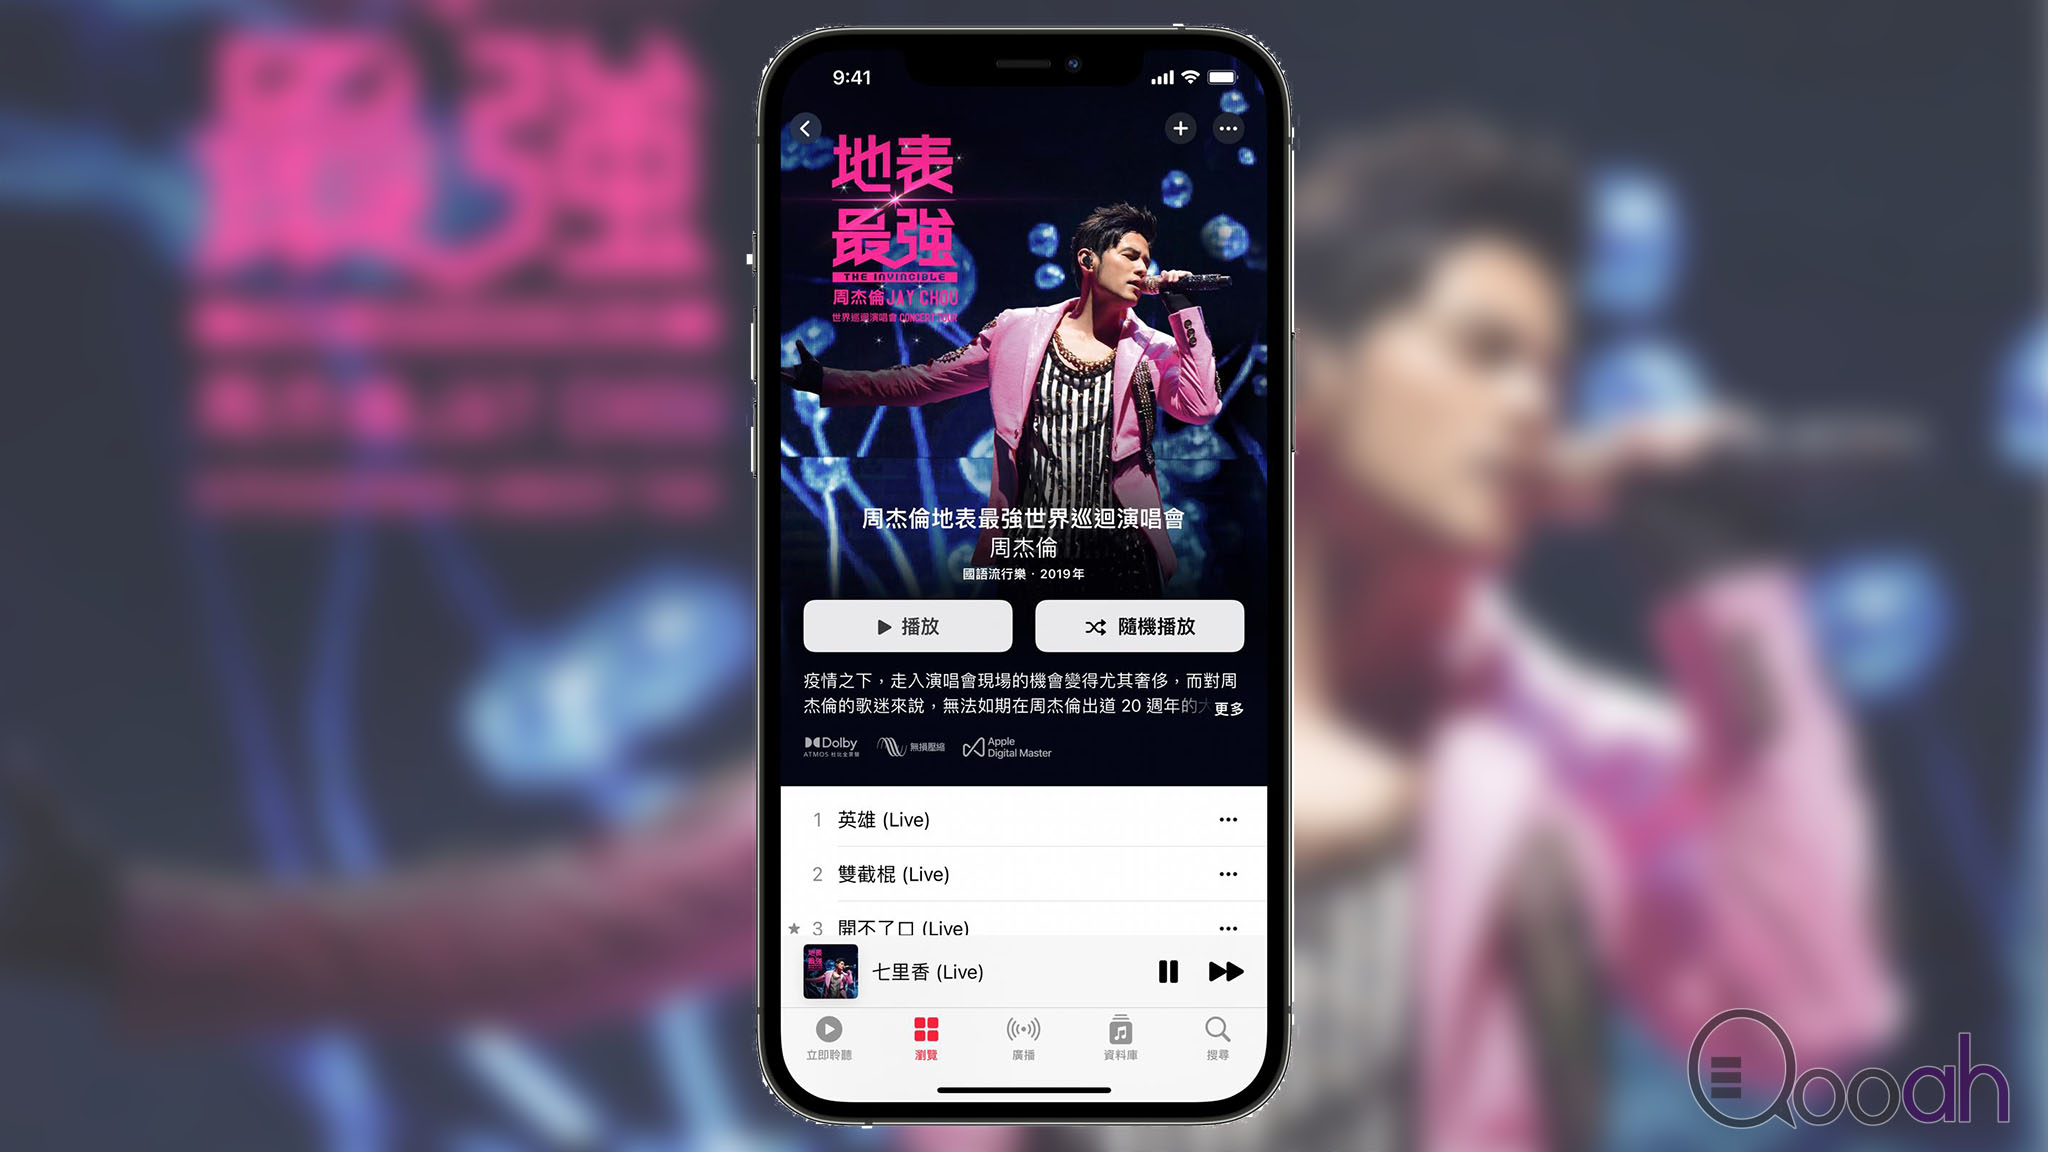 Apple Music Releases Jay Chou's "The Strongest on Earth" concert album space audio remake thumbnail